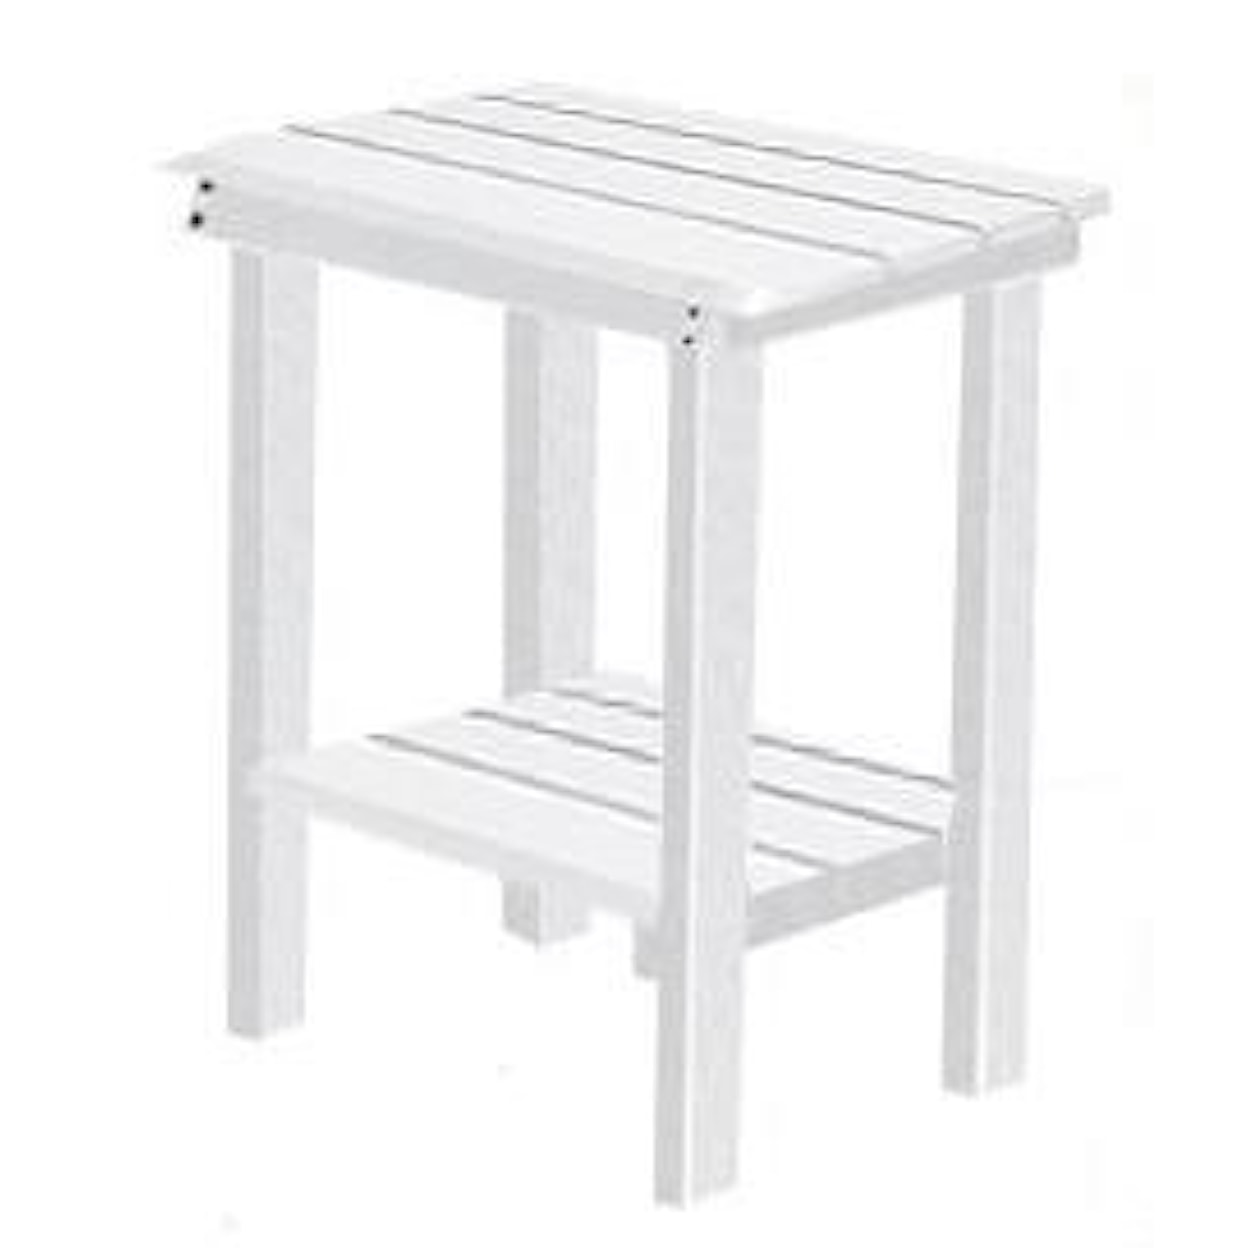 Berlin Gardens Counter Height End Tables Outdoor Counter Height End Table